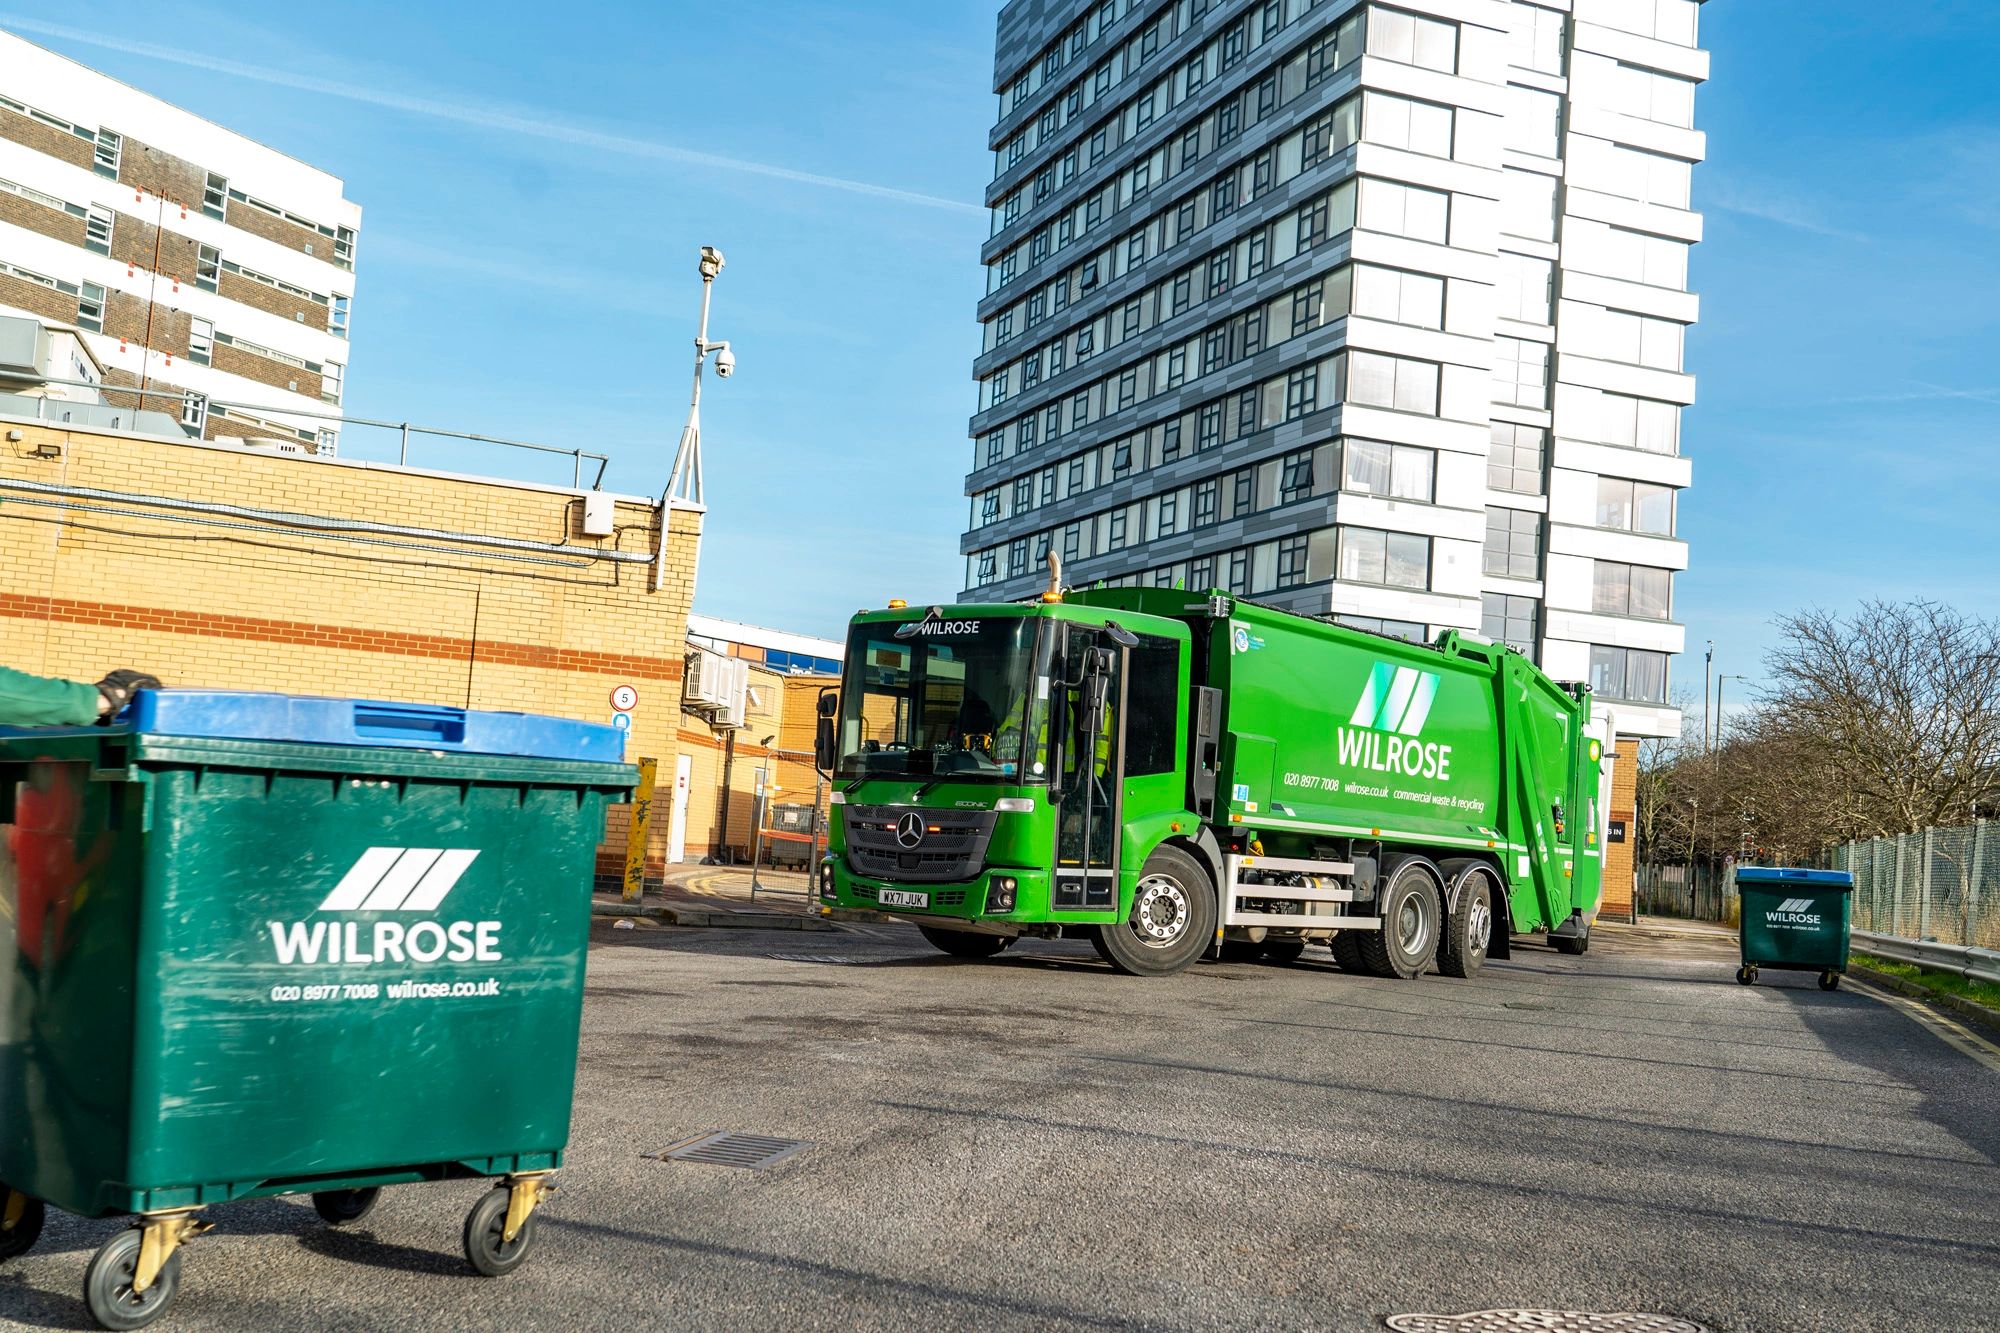 Commercial waste dustcart next to building in battersea.